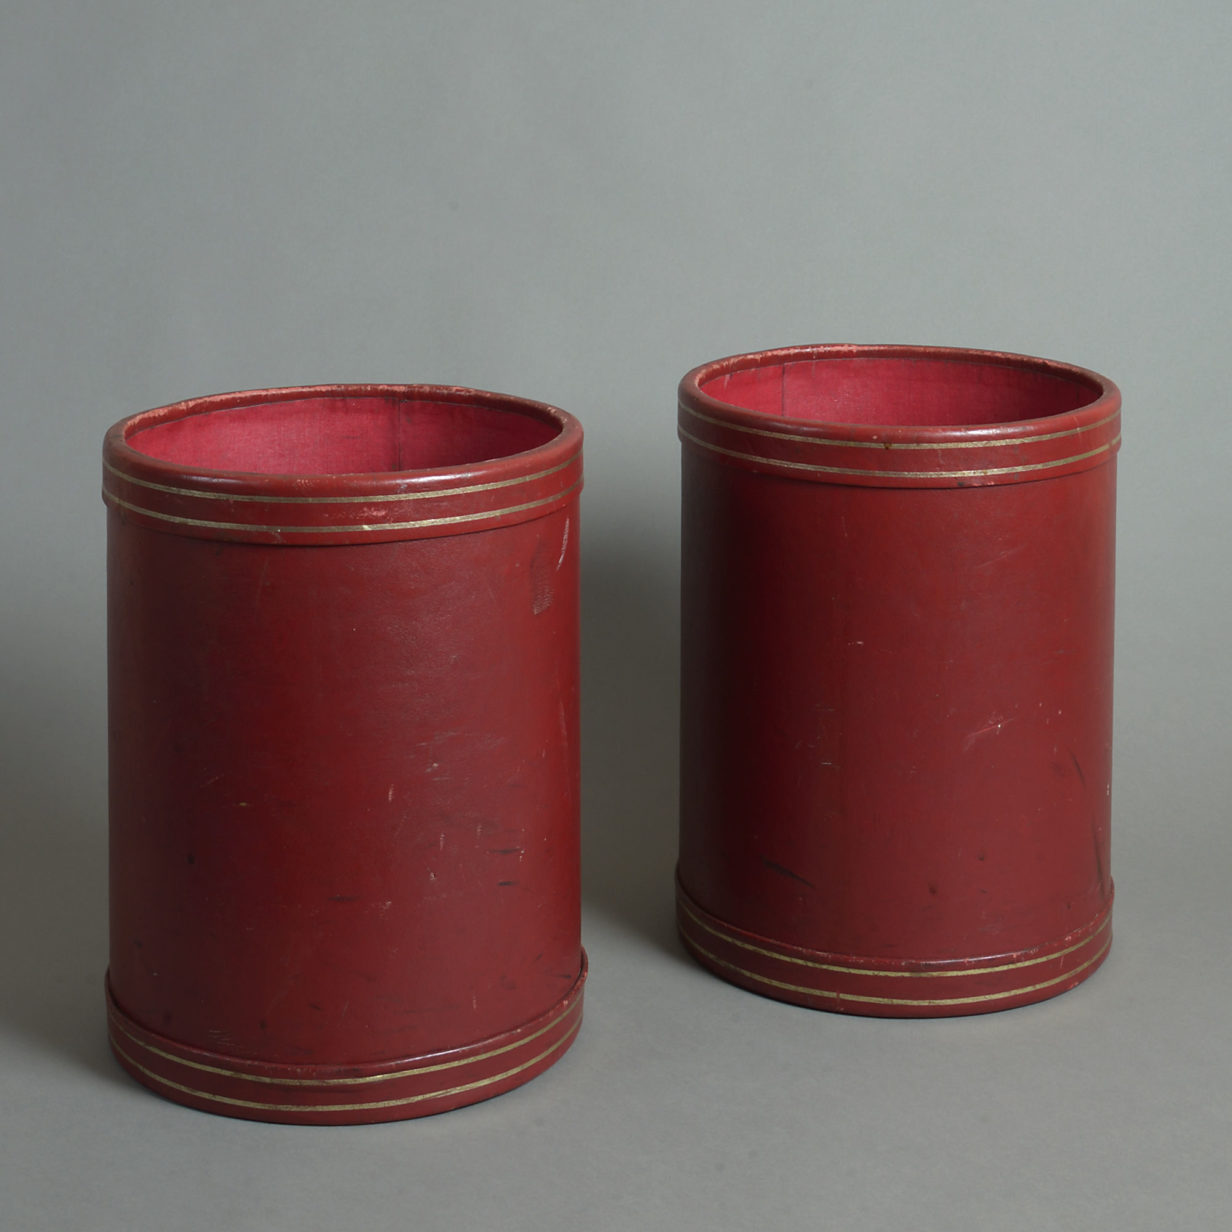 Pair of mid-20th century moroccan red leather paper baskets